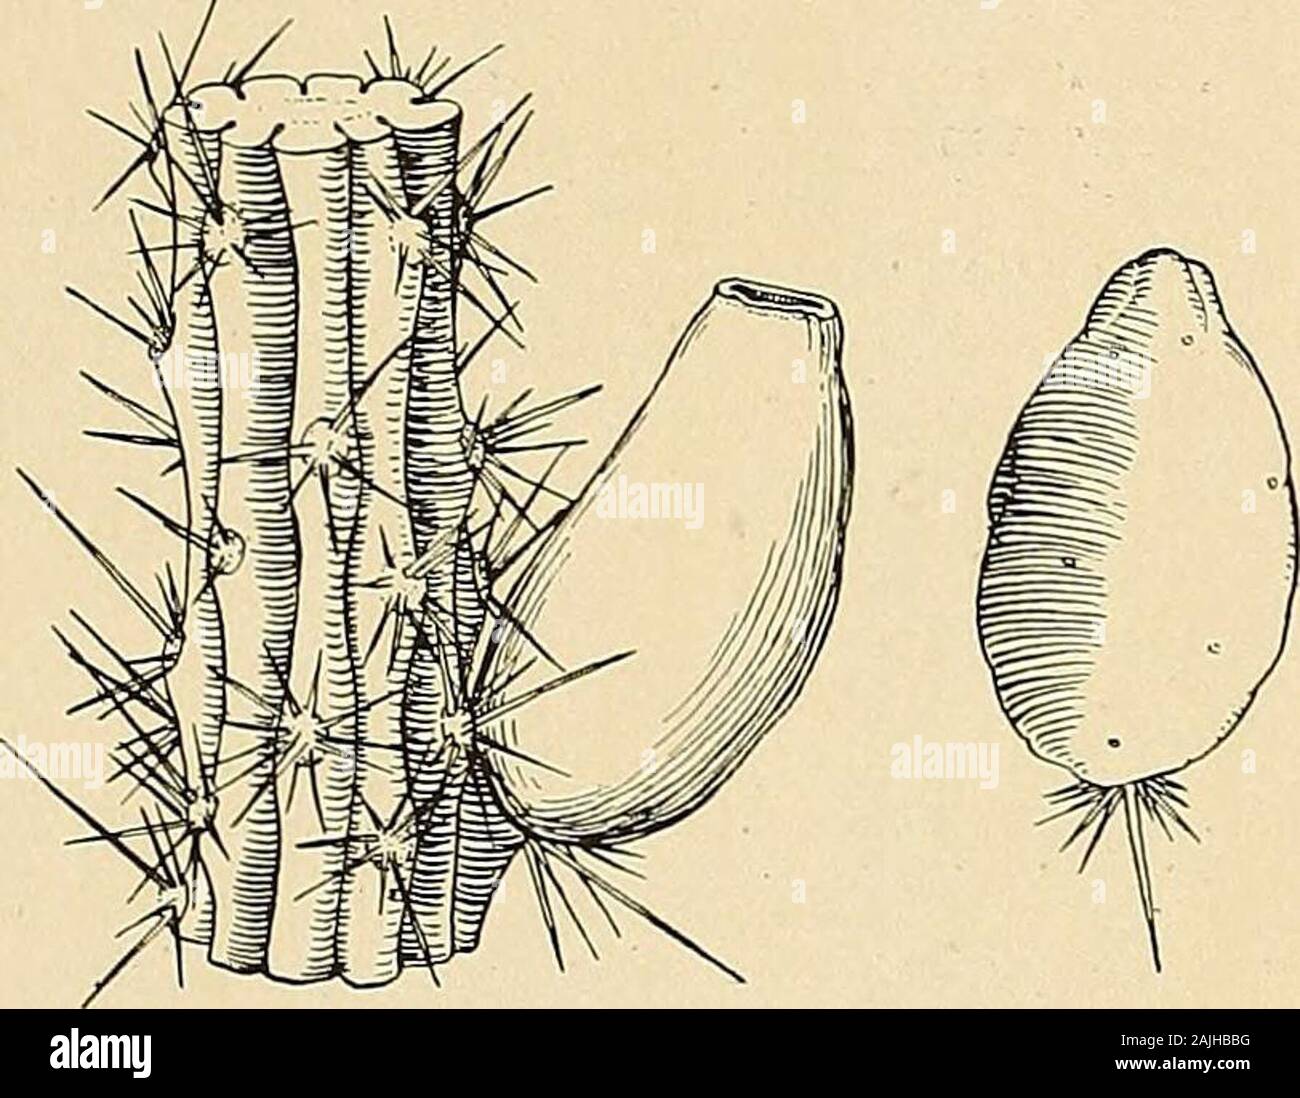 The Cactaceae : descriptions and illustrations of plants of the cactus family . t; ribs usually 9 or 10, rather low for this genus, about 1 cm. high; areoles 5 to 15cm. apart, small; spines numerous, gray, acicular, the longest ones 5 cm. long; flowers nocturnal,narrowly funnelform, 7 to 8 cm. long, the limb 2.5 to 3 cm. broad, dark green except tips of innerperianth-segments; ovary bearing a few small ovate scales with a little felt in their axils; fruit darkred (occasionally white), oblong, 3 to 4 cm. long, with white flesh; seeds dull black, tuberculate Type locality: Tropical America. Dist Stock Photo